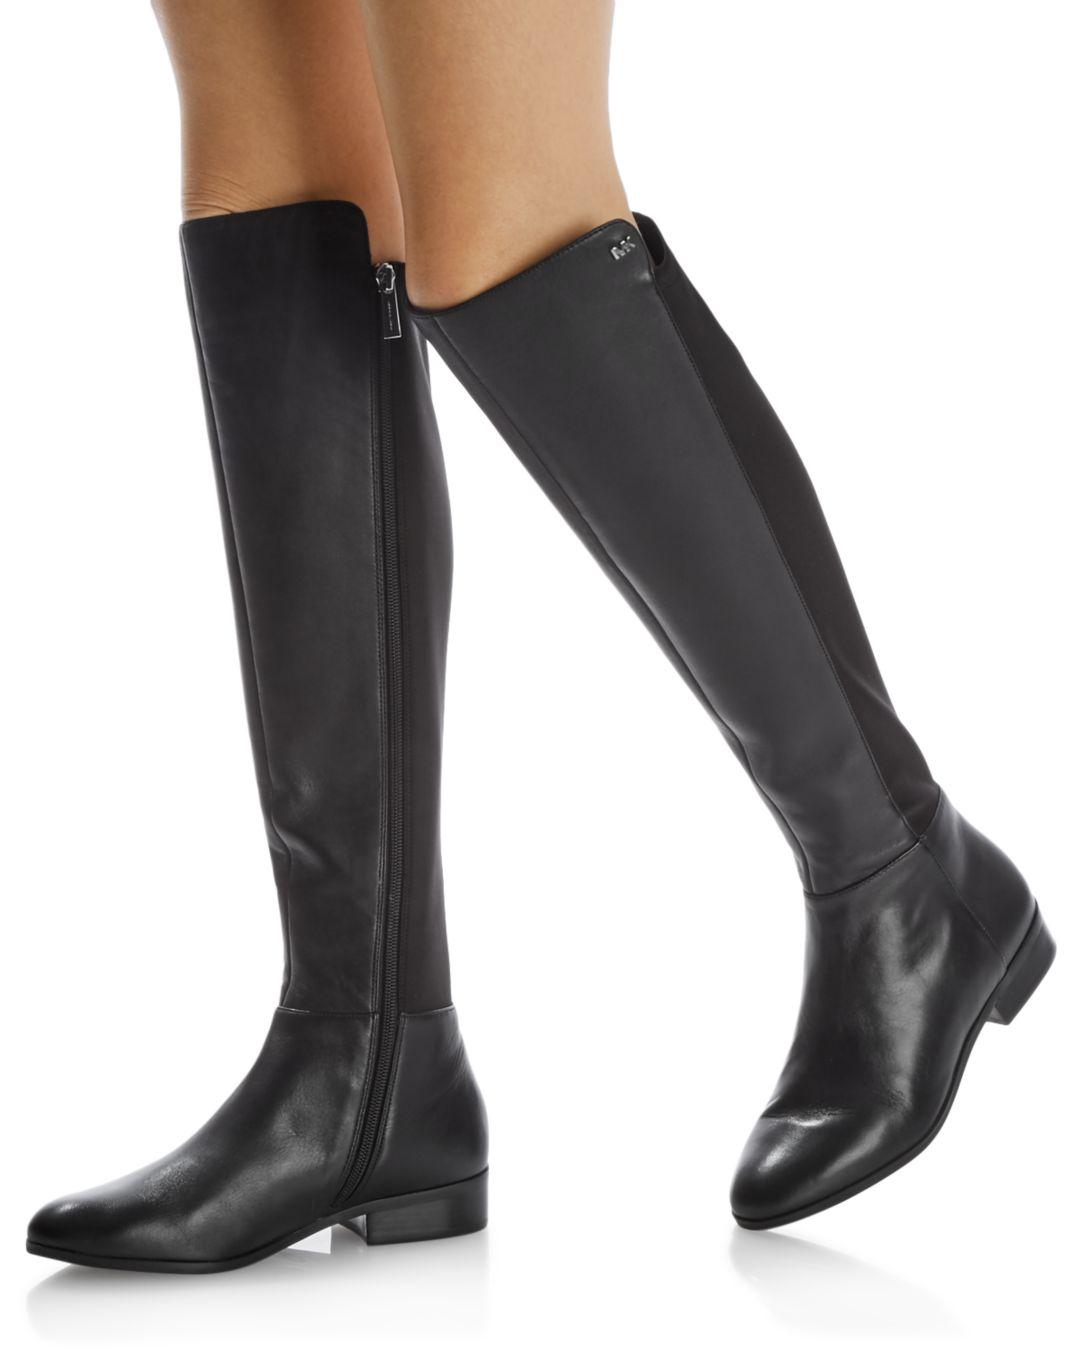 bromley riding boots